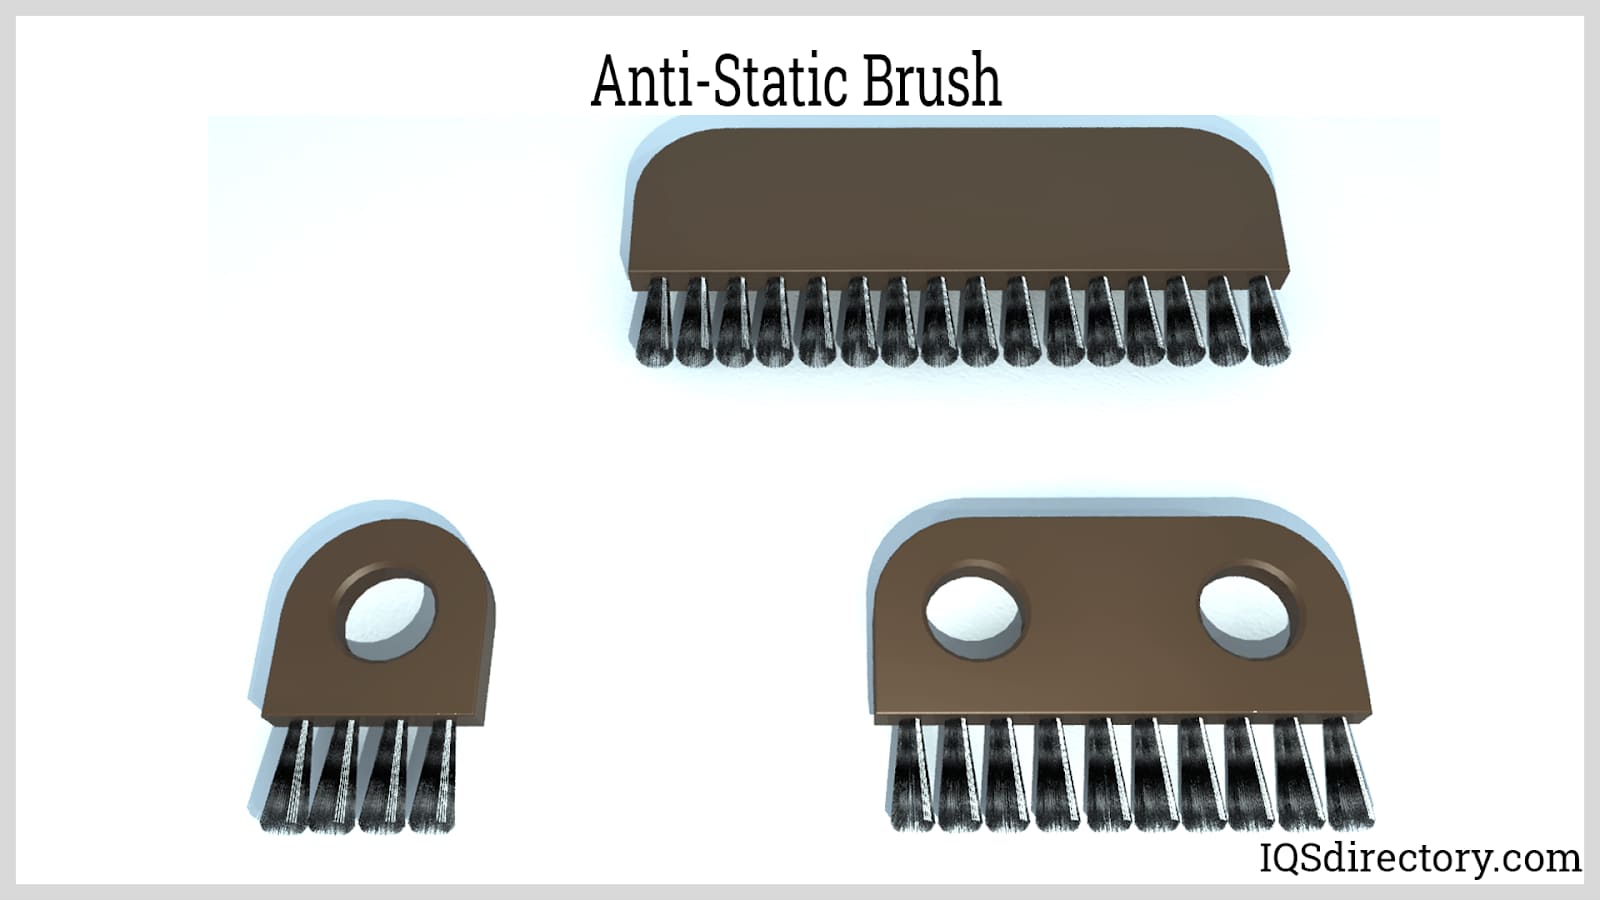 Grounded Anti-Static Brush with Grounding Cord